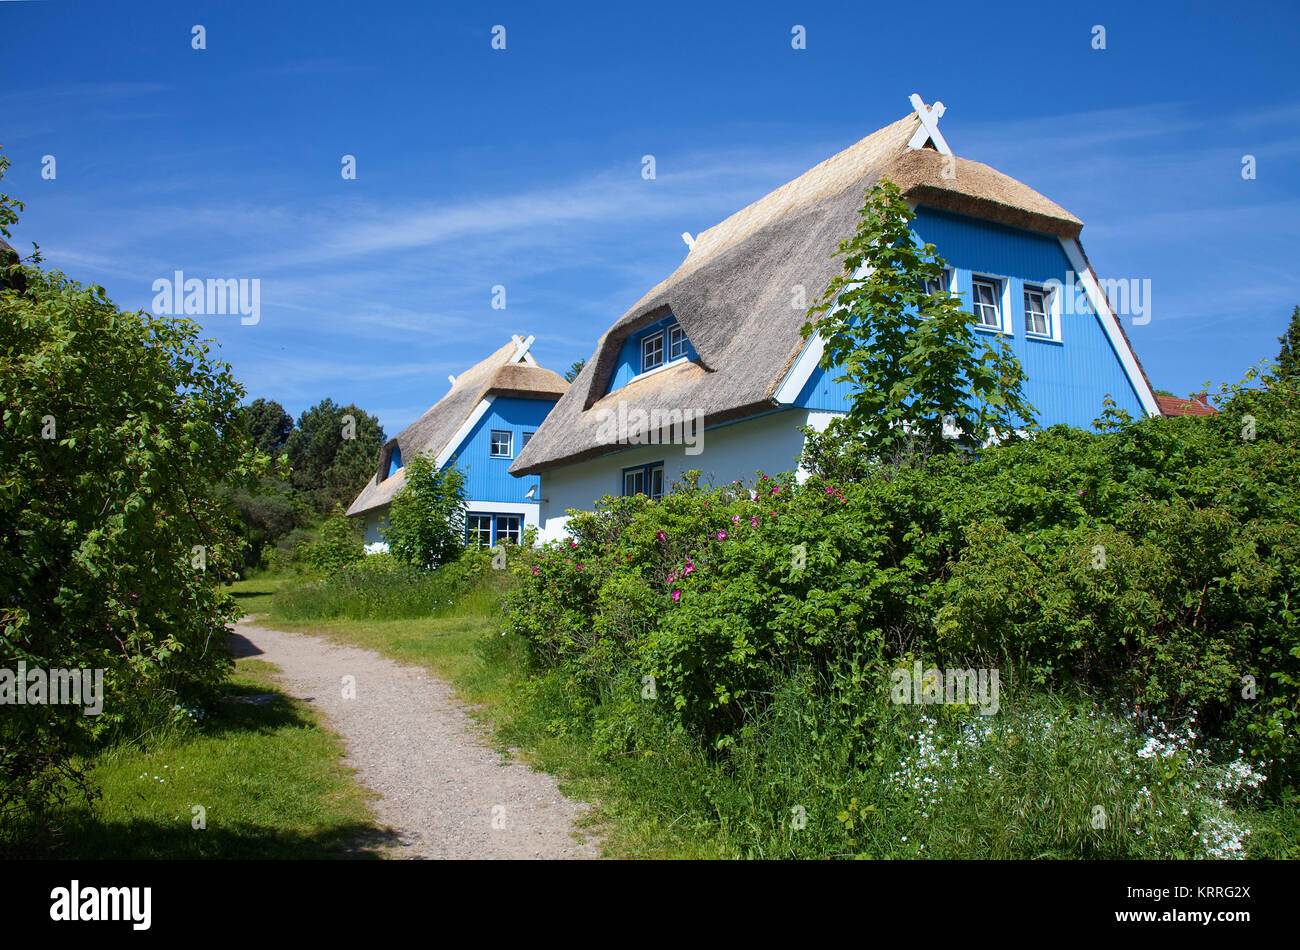 Thatched-roof houses at the village Kloster, island Hiddensee, Mecklenburg-Western Pomerania, Baltic Sea, Germany, Europe Stock Photo